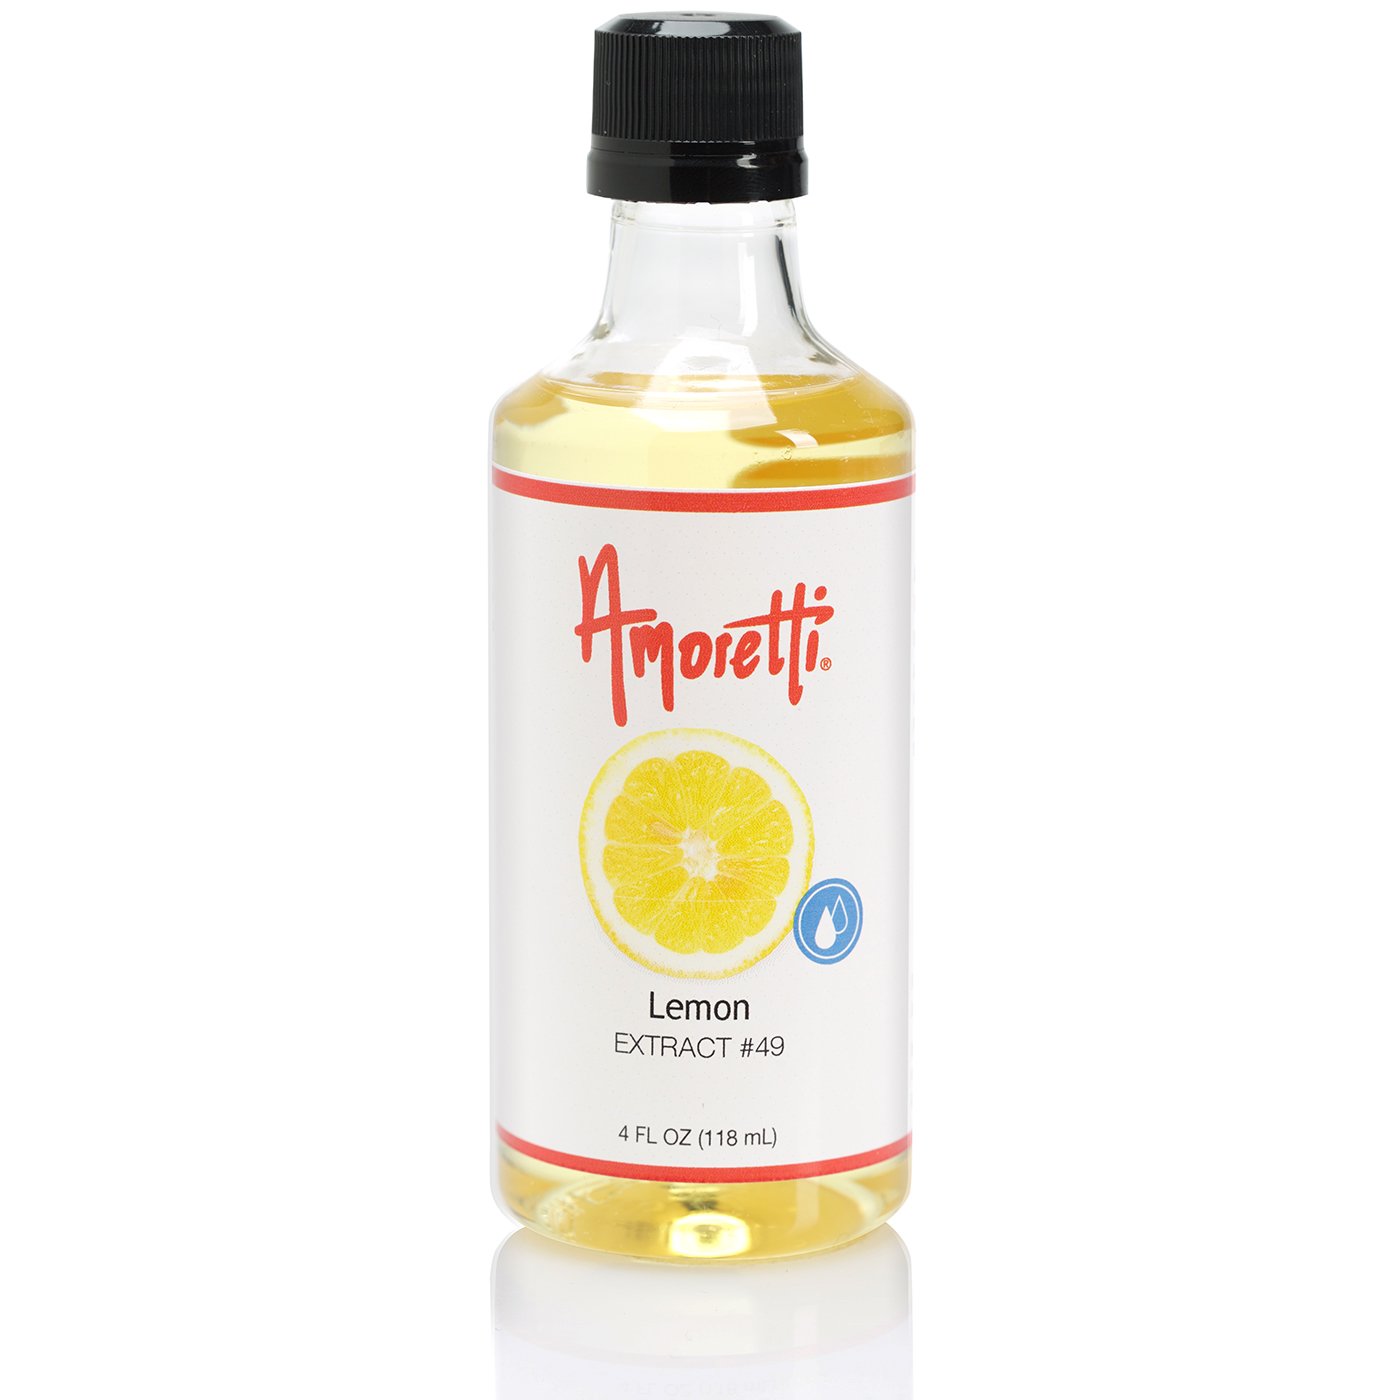 Amoretti - Meyer Lemon Extract Oil Soluble 4 oz - Highly Concentrated & Perfect for Pastry or Savory Applications, Preservative Free, Vegan, Kosher